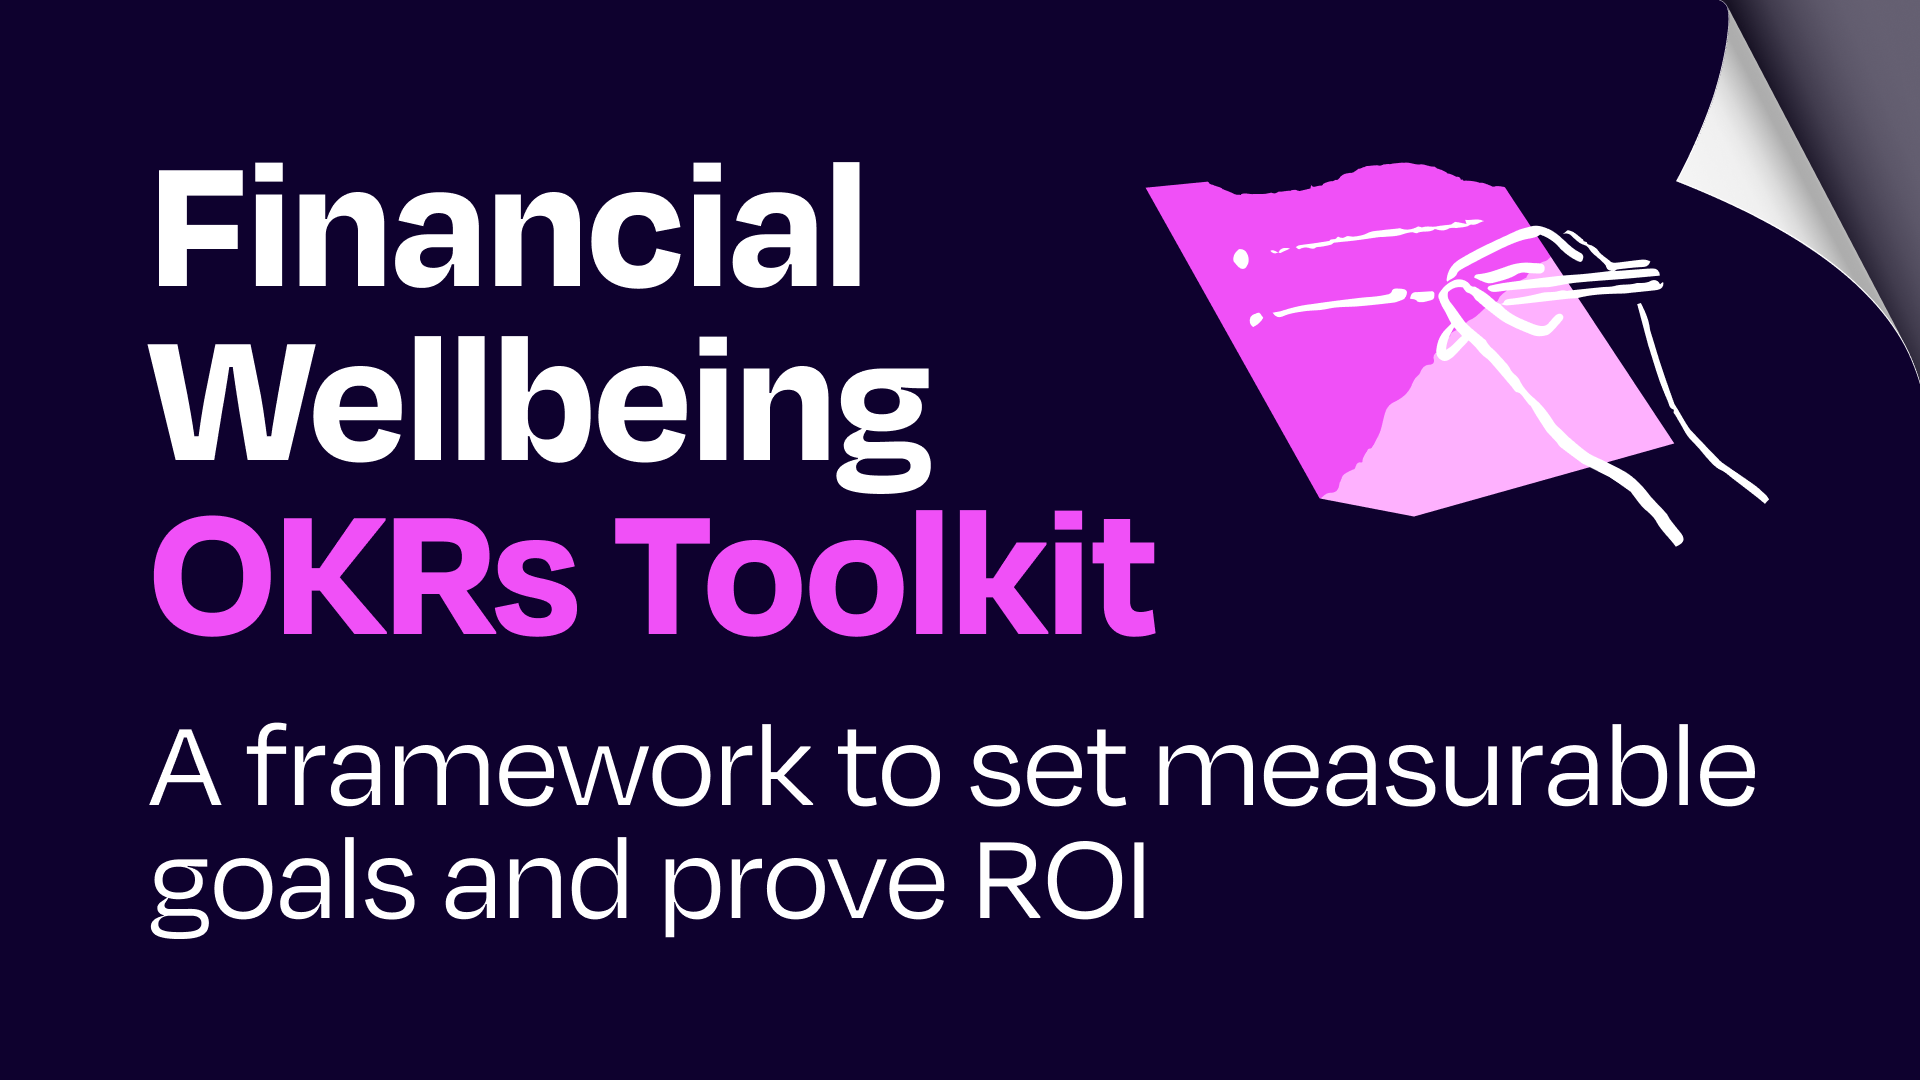 Financial Wellbeing OKRs Toolkit